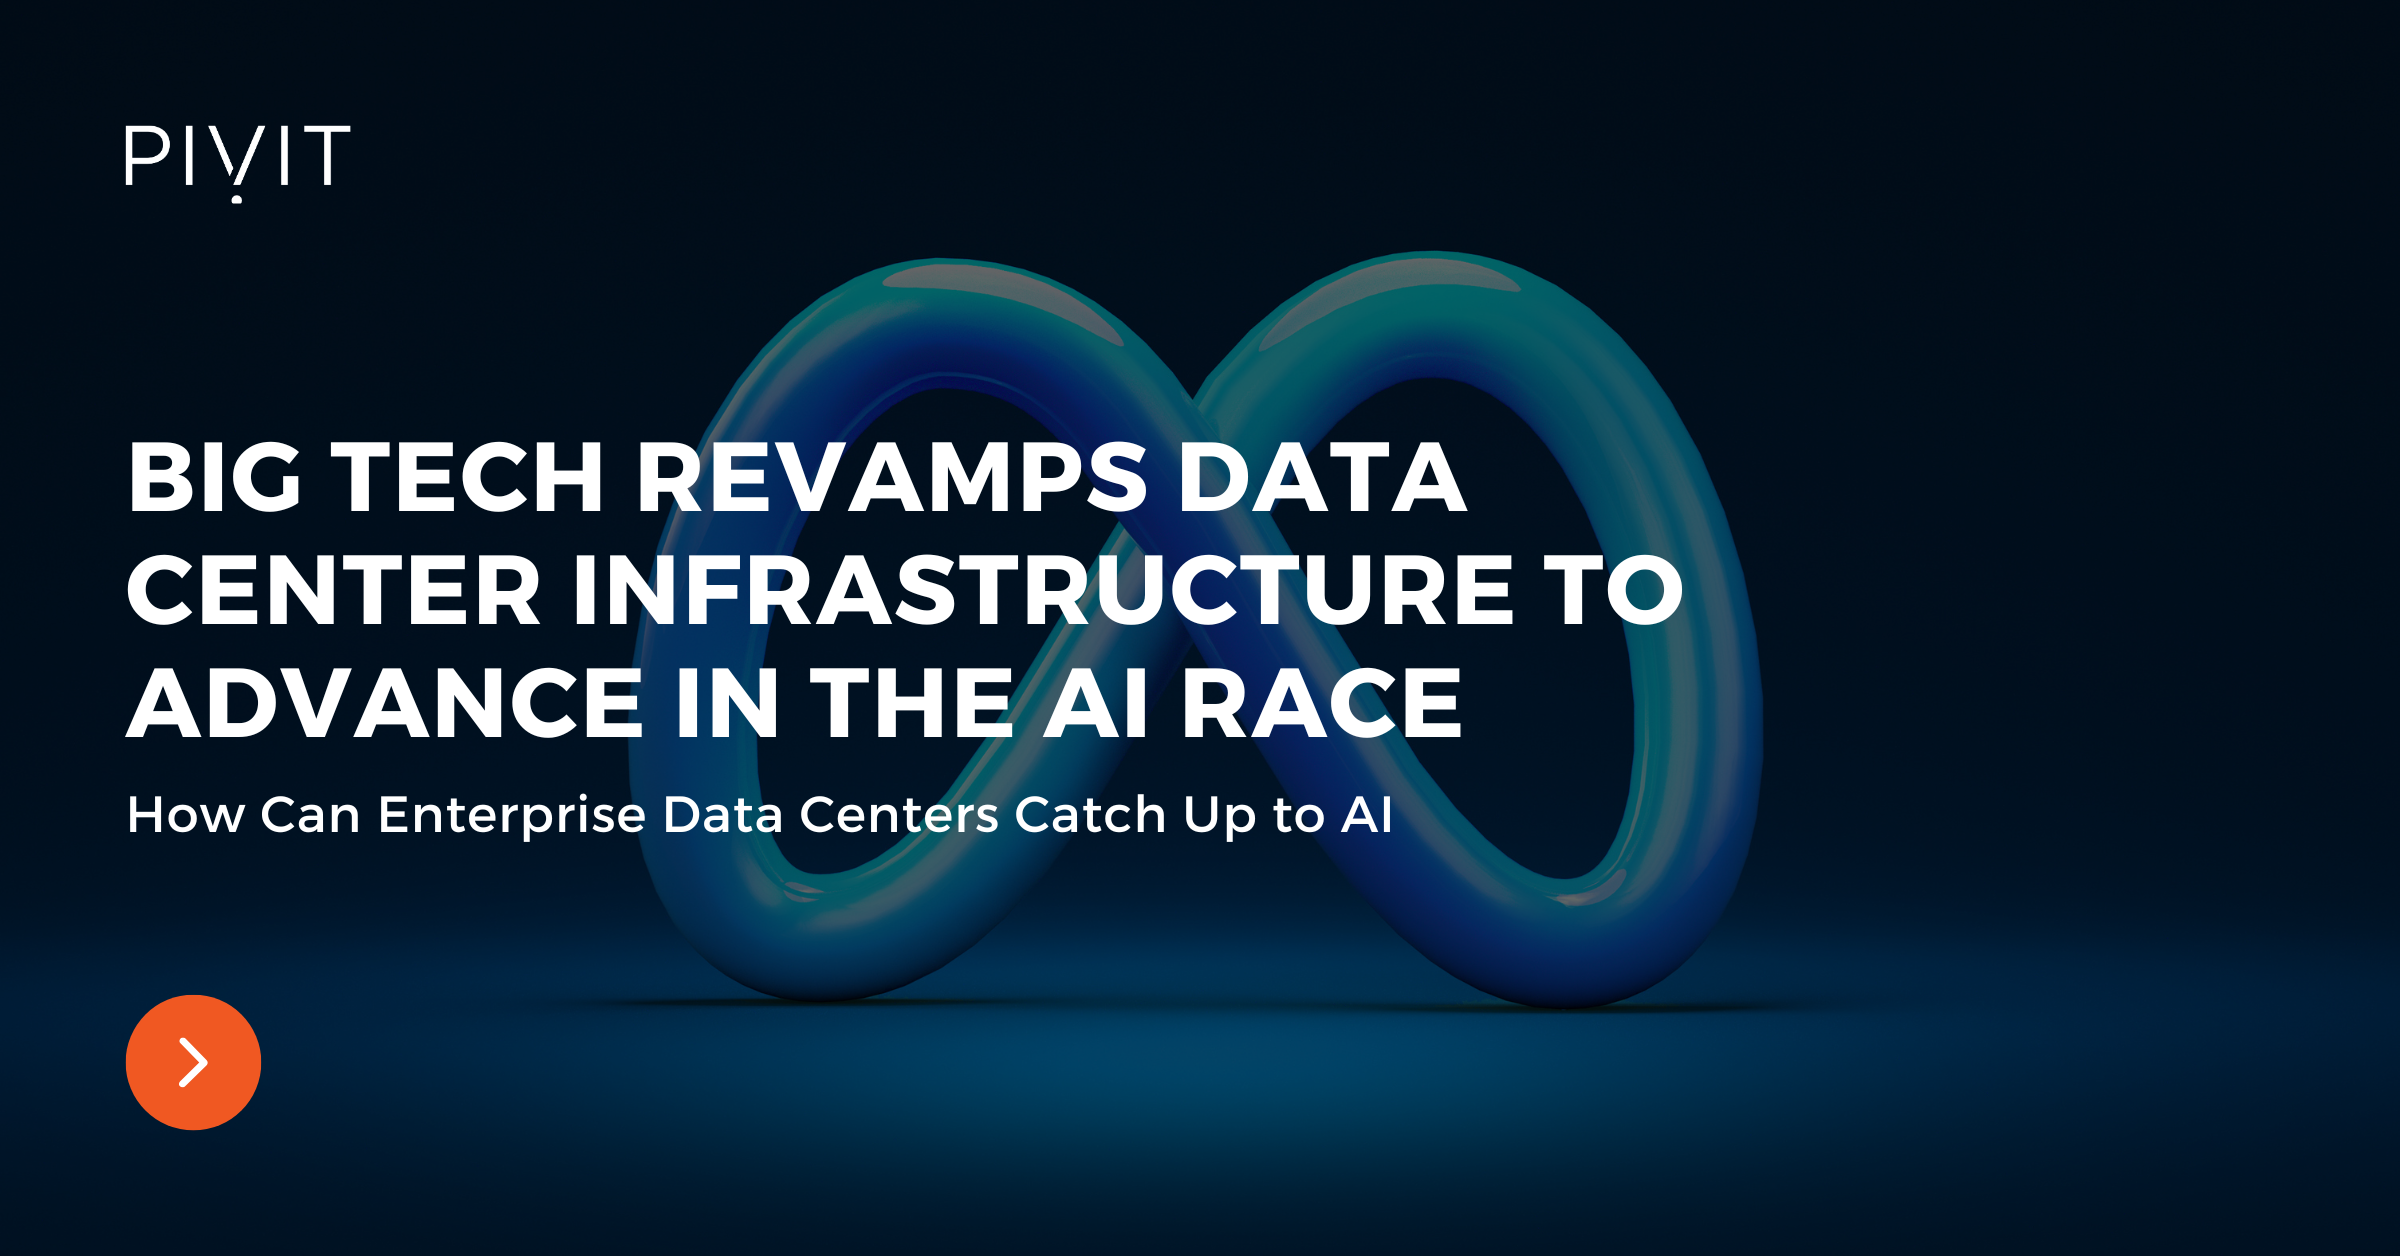 Big Tech Revamps Data Center Infrastructure to Advance in the AI Race